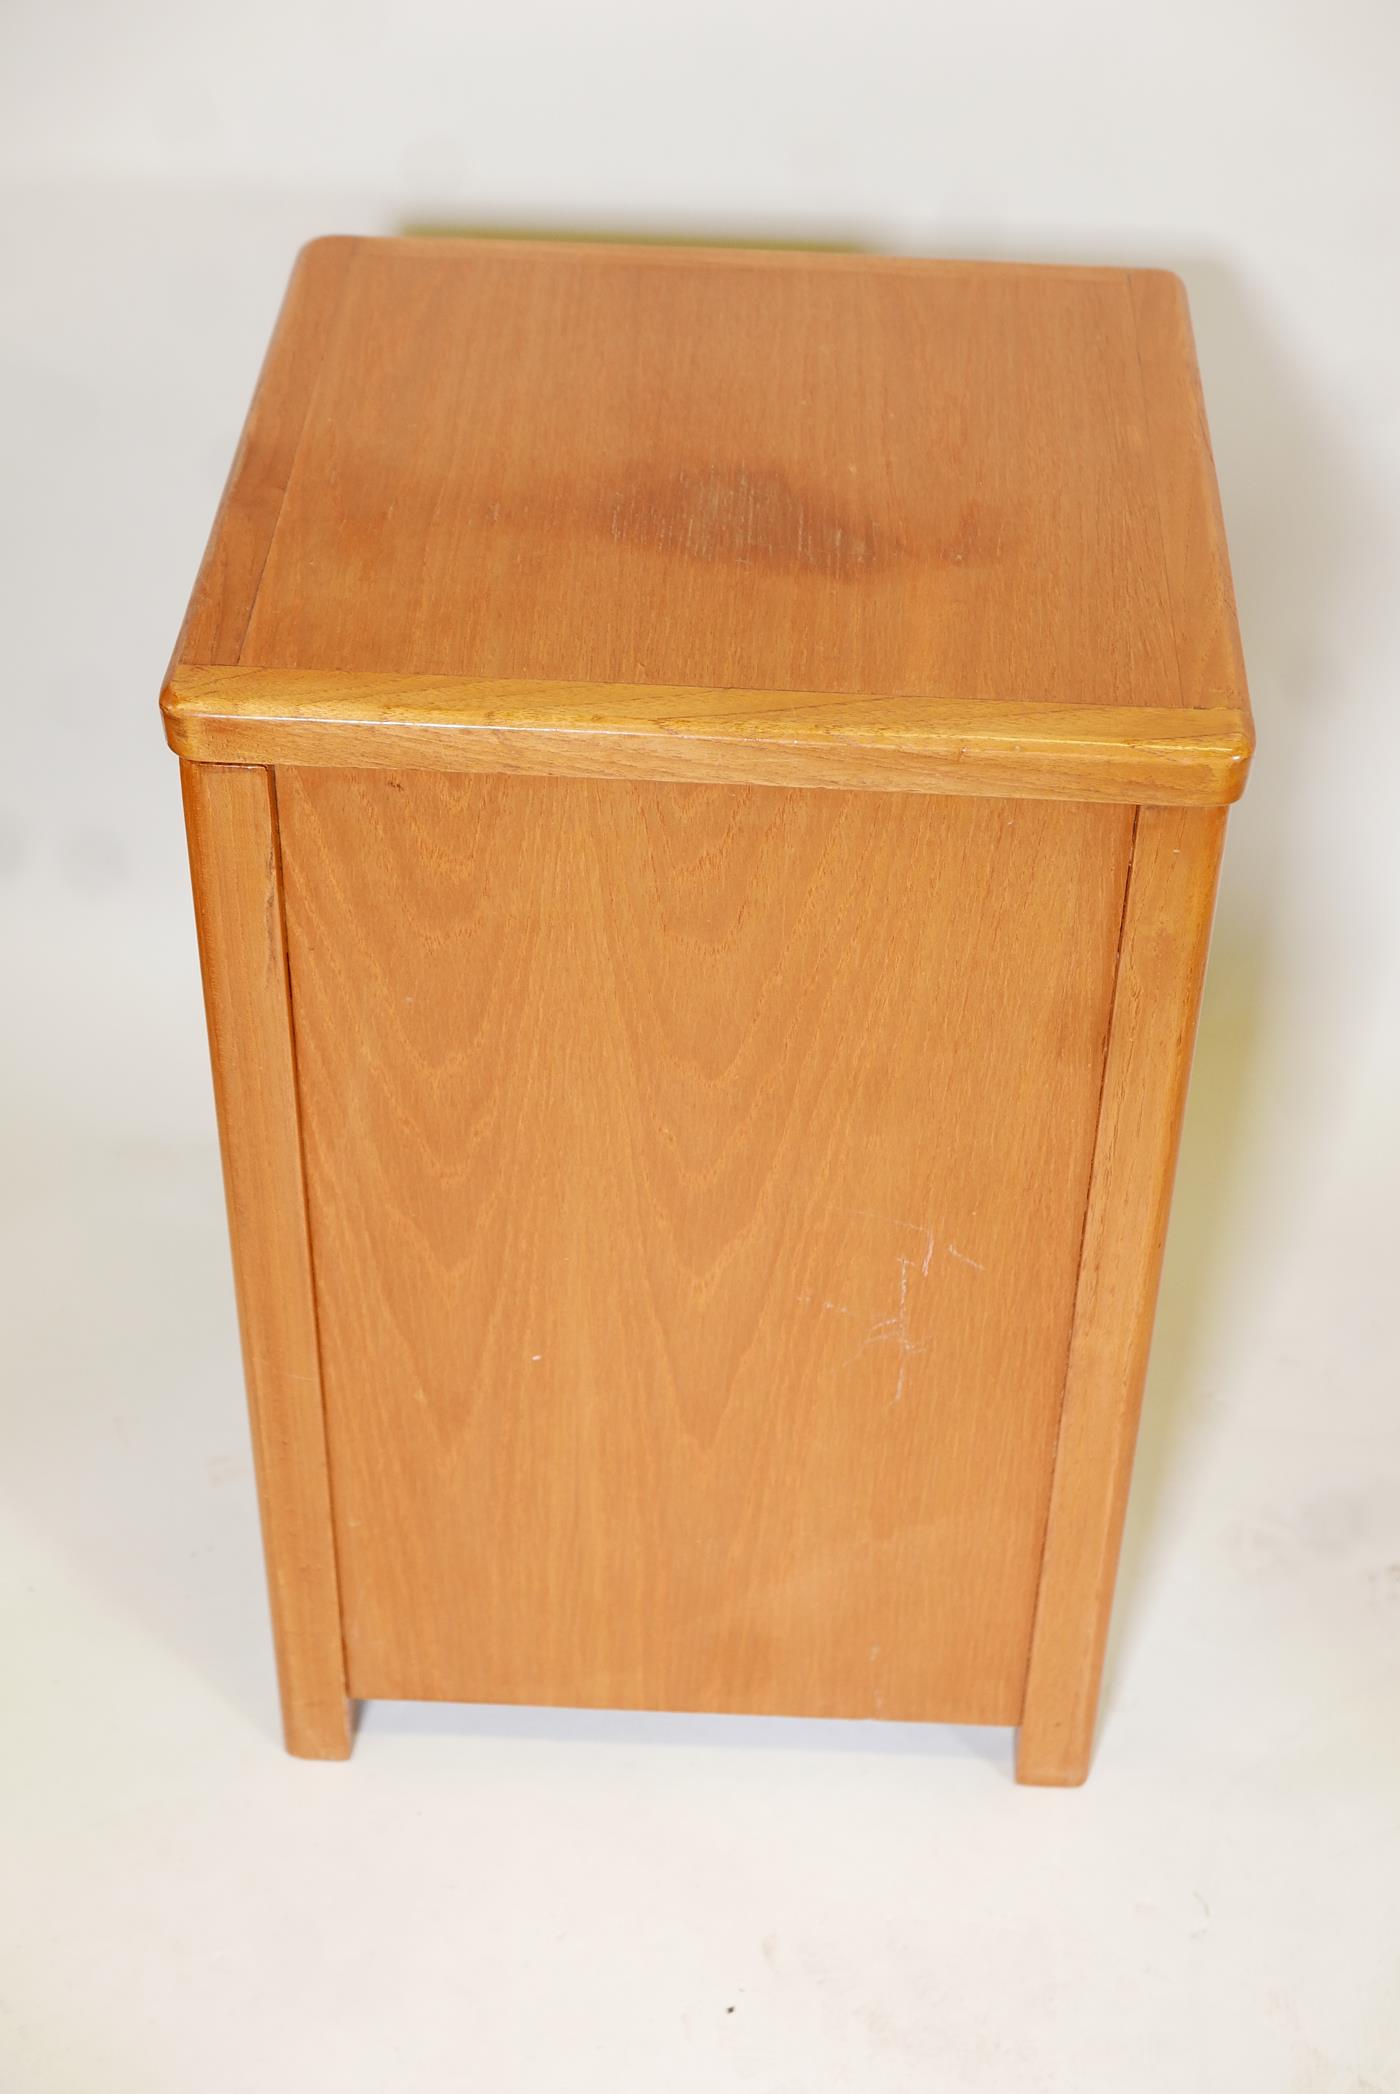 A 1960's teak laundry box, with military style brass handles. 23" x 15" x 15"